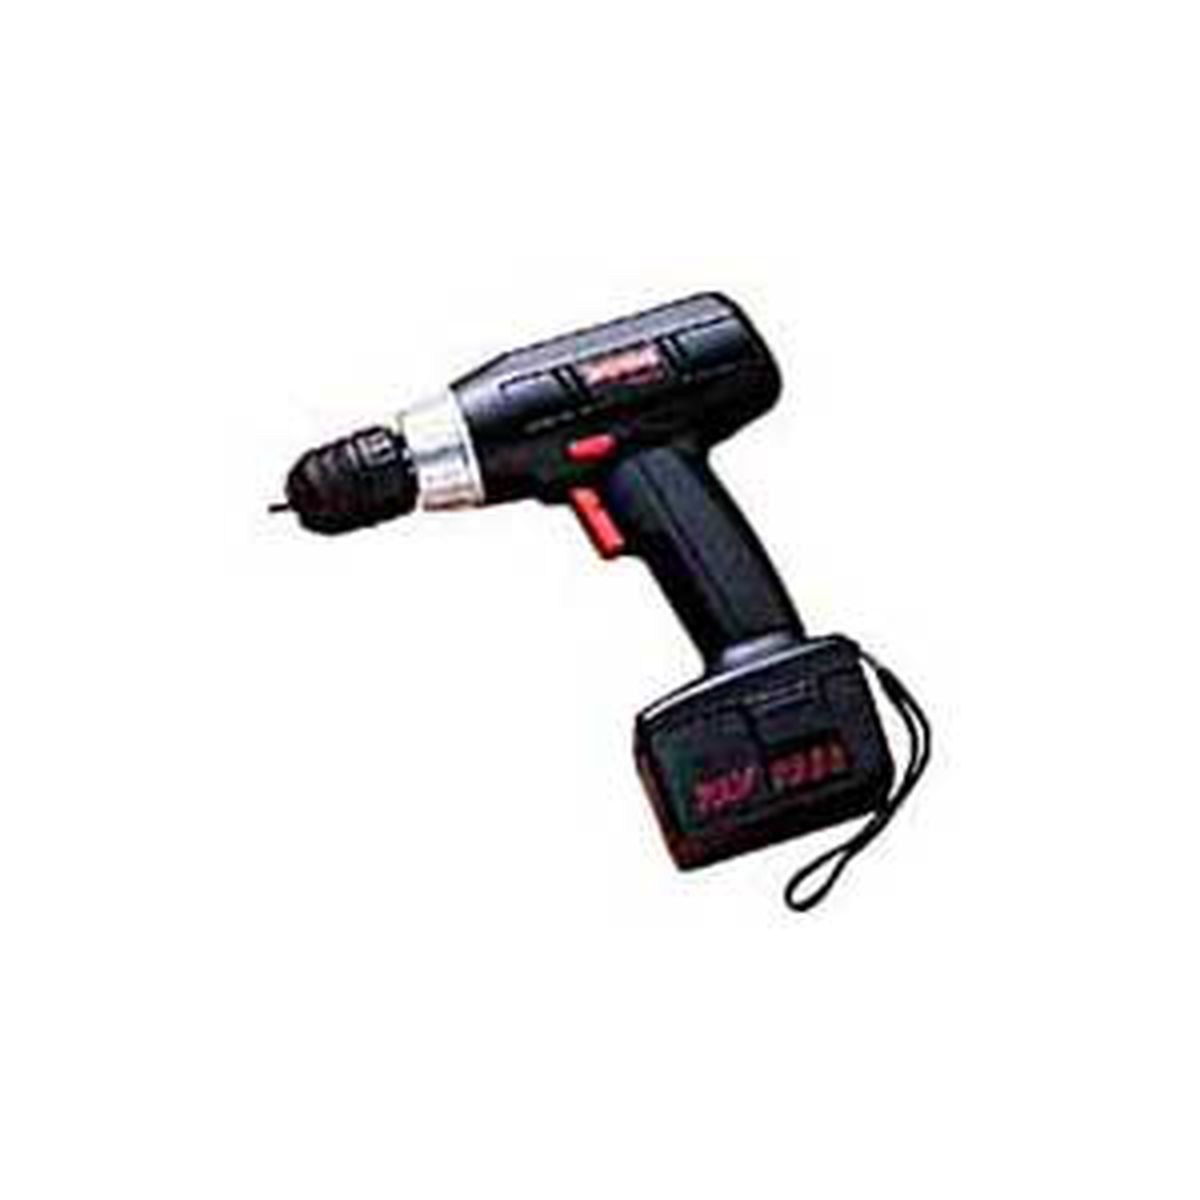 THE HANDLE on a cordless drill is either a pistol grip or T-handle. The T-handle is most comfortable for general drilling and driving screws.